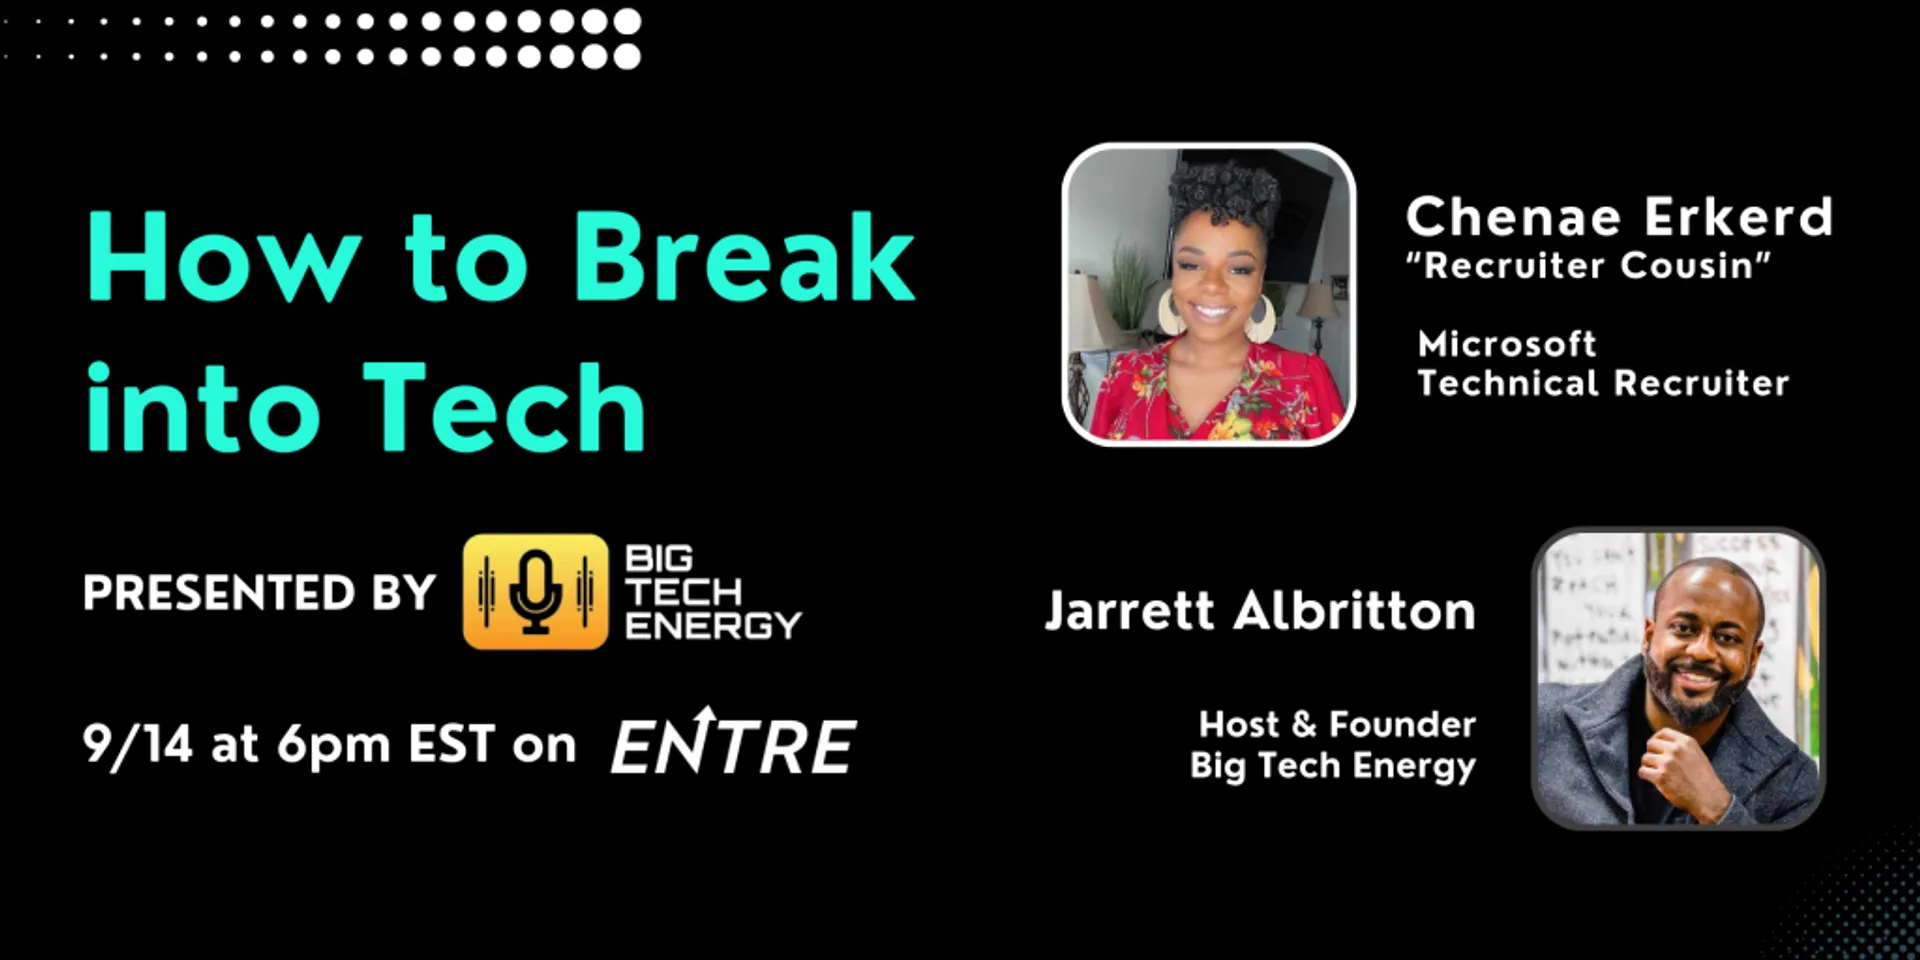 Next week on September 14th at 6 PM ET, I’ll be doing a live podcast episode on @joinentre with @recruitercousin, who recruits for Microsoft and also works as a career coach

I’ll be discussing with @recruitercousin how she has helped 100’s of people break into Tech, increase their salary, or find higher paying roles.

https://joinentre.com/event/a3d4db02-db1f-4d8b-bc4a-f6473efcdbb3

RSVP using the link above so you can ask questions during the Q&A.